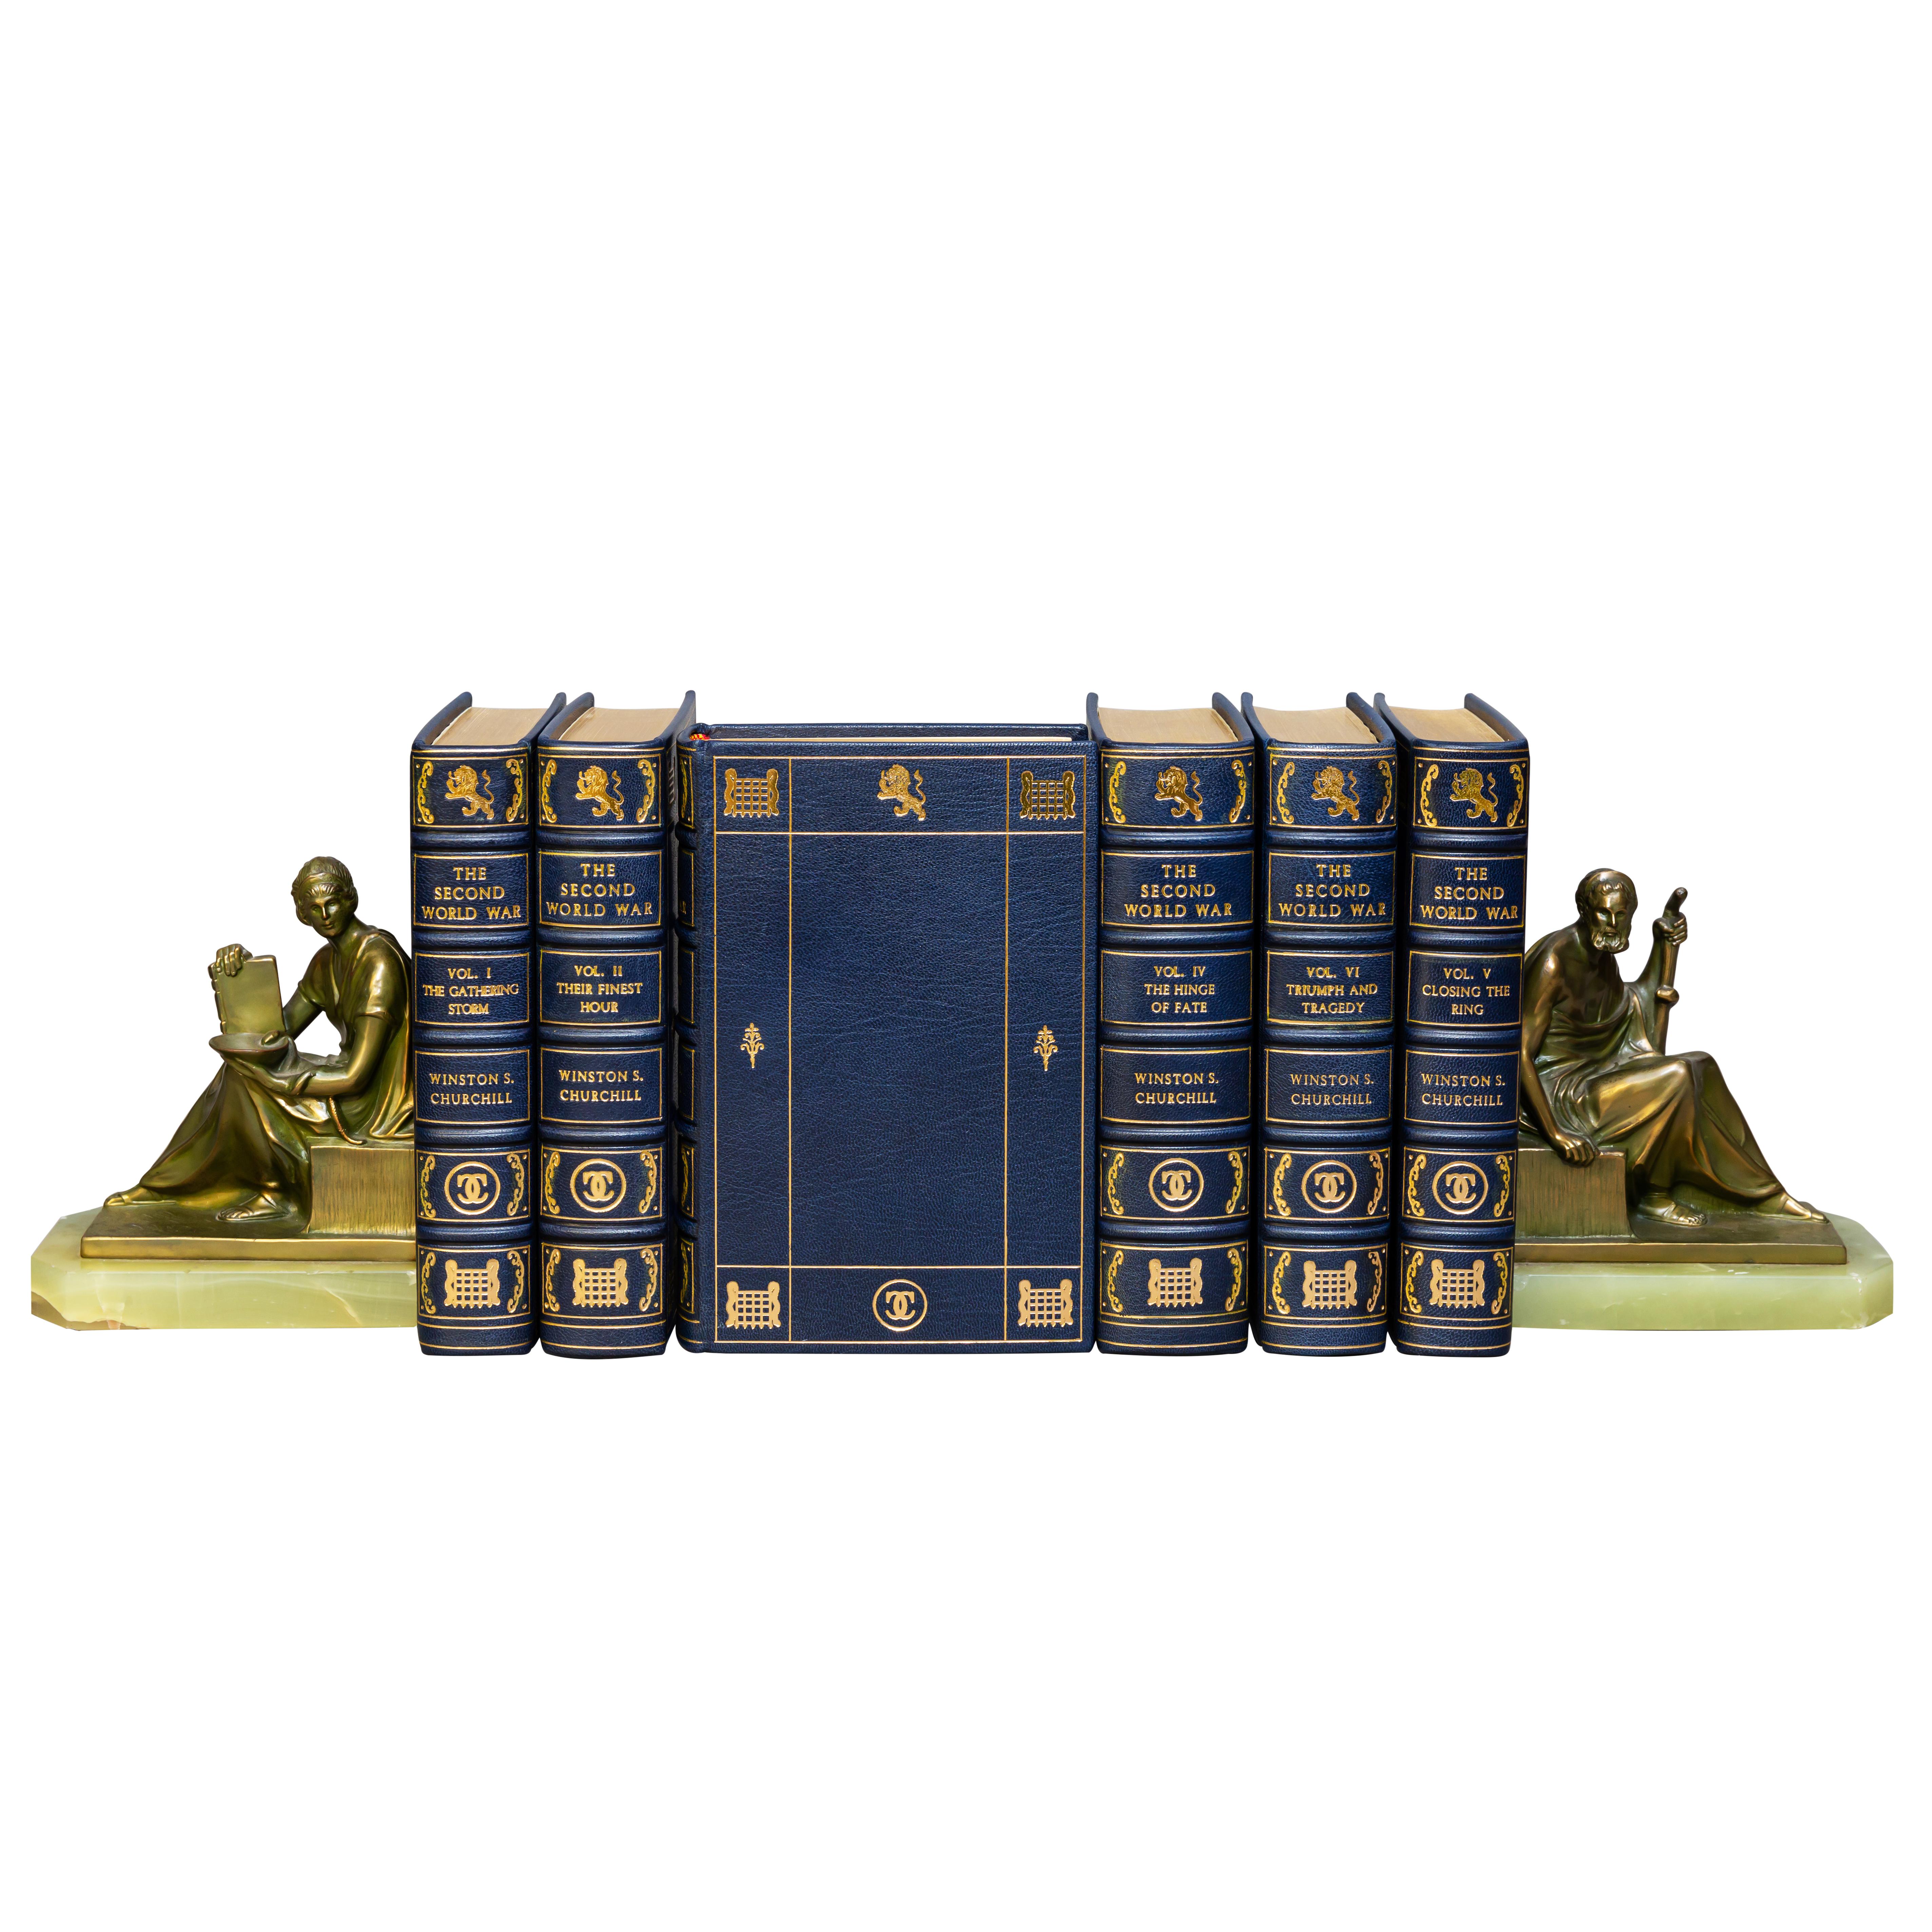 6 Volumes. Sir Winston S.Churchill. Second World War. Rebound in full blue morocco, all edges gilt,
Raised bands, ornate gilt on covers and spines, marbled endpapers, Illustrated. Published:
London: Cassell & Co. 1948-54. First Editions. Handsome